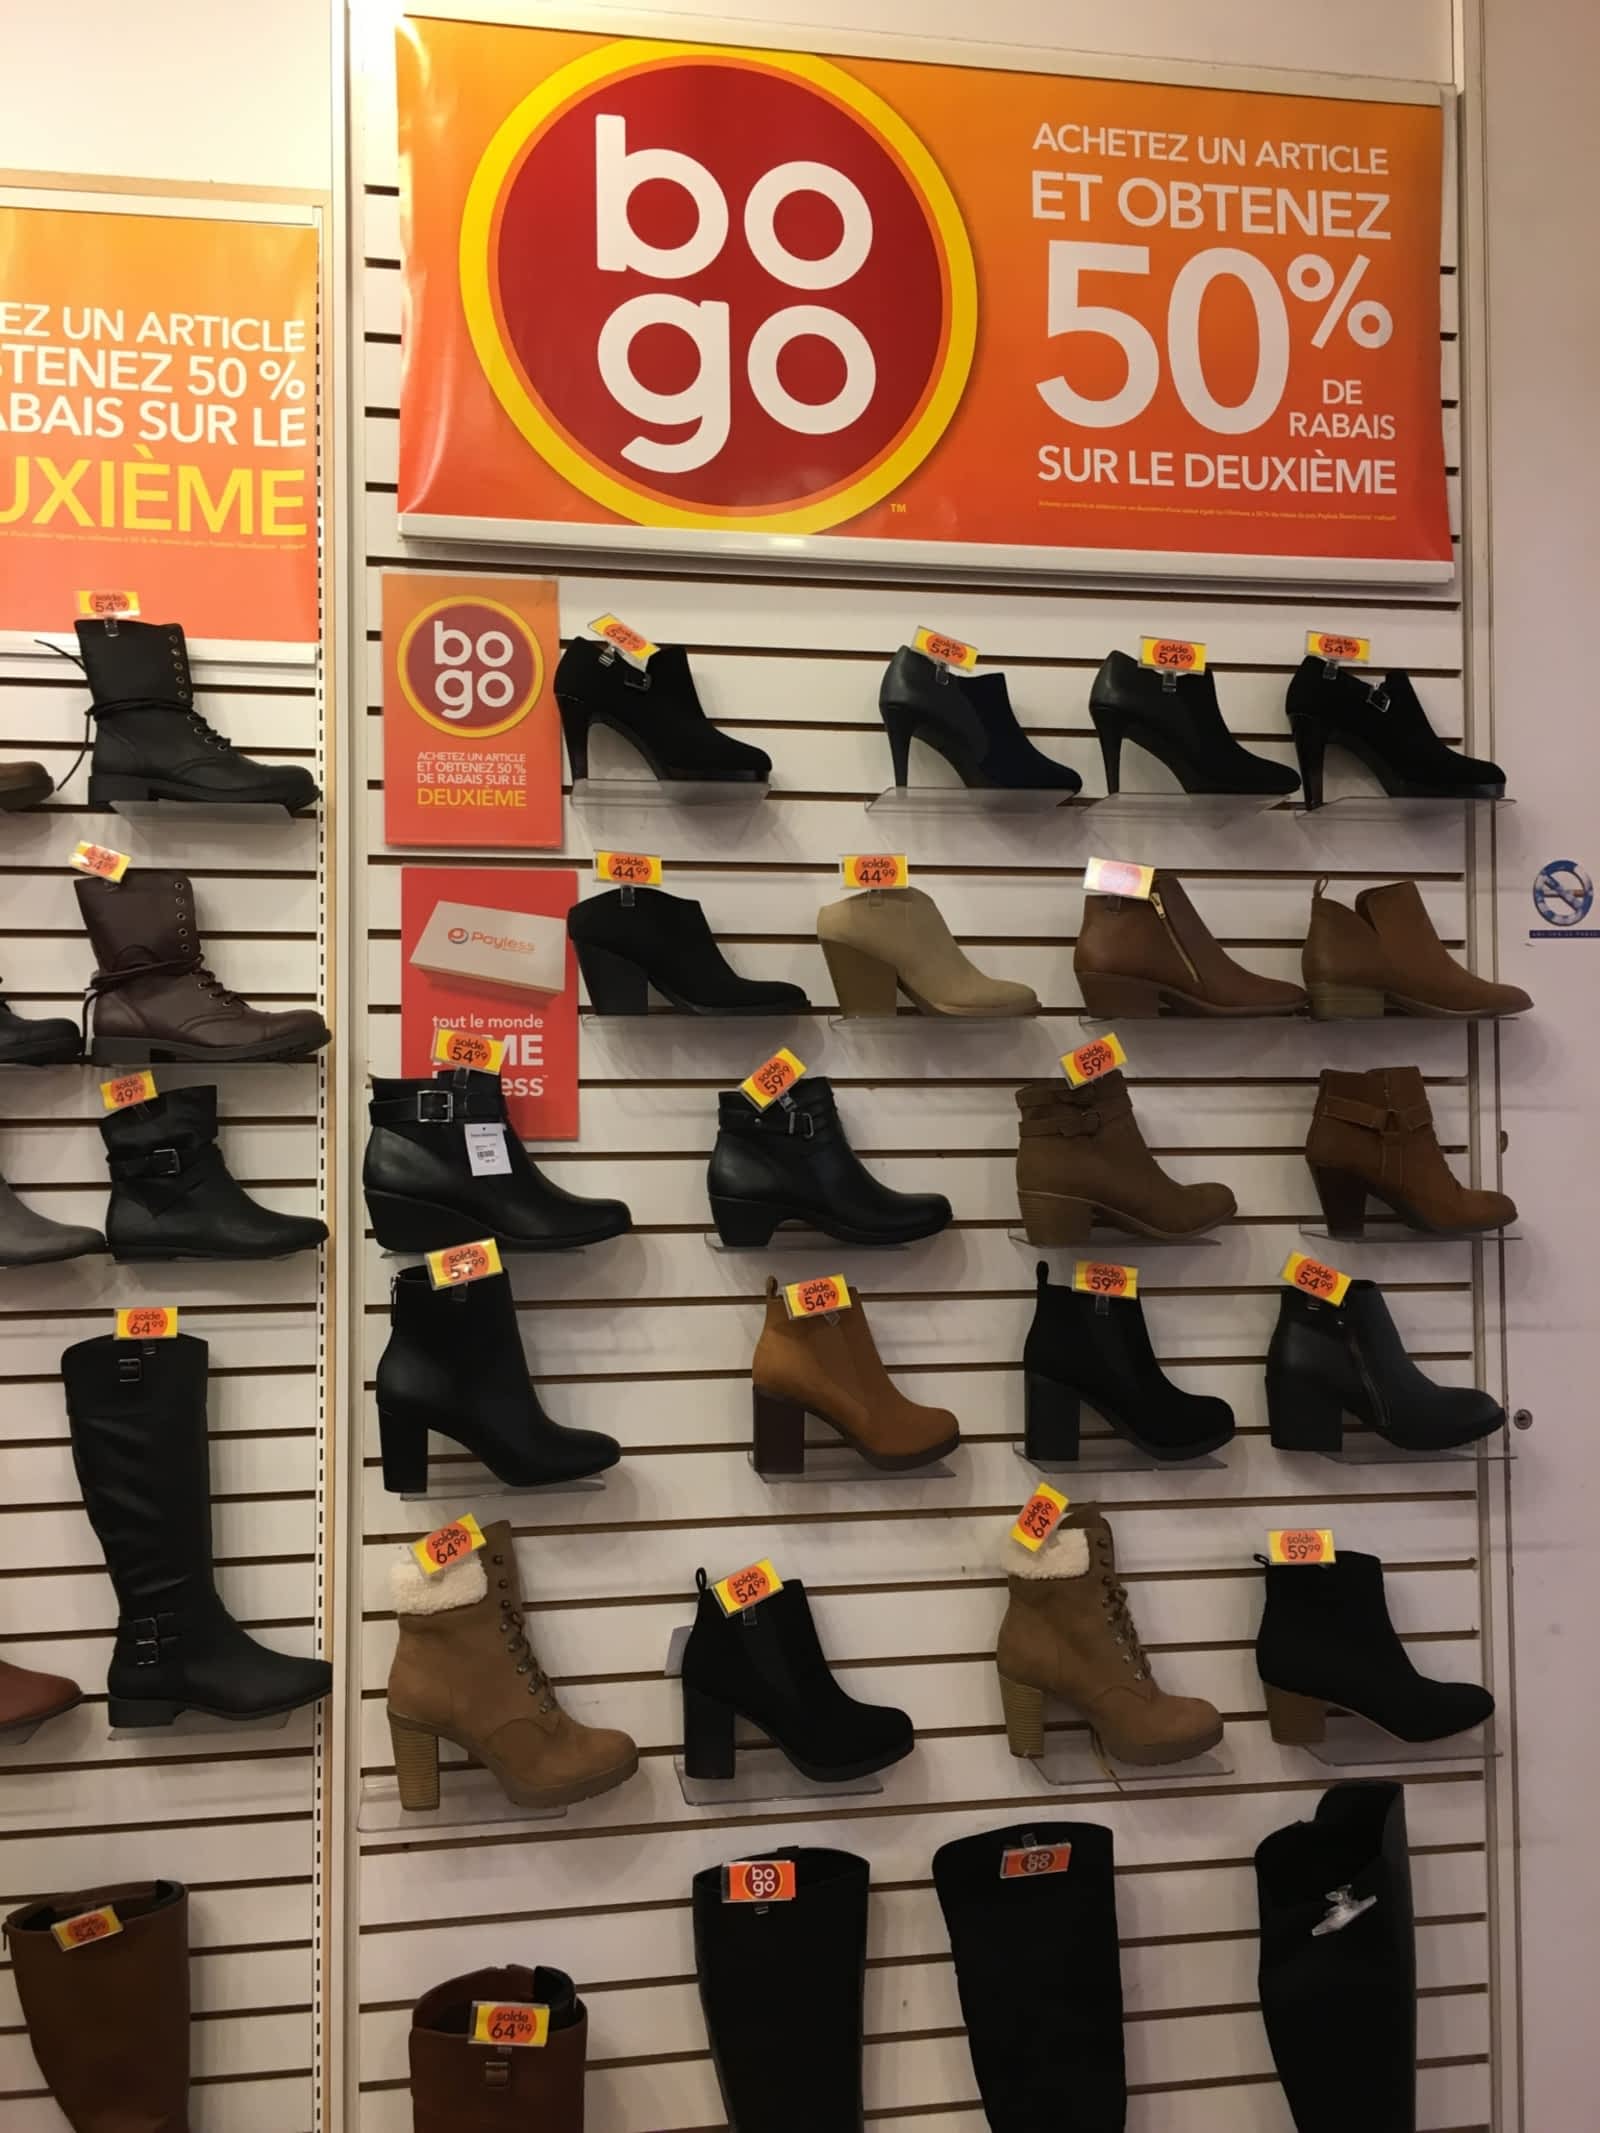 Payless ShoeSource - Opening Hours 